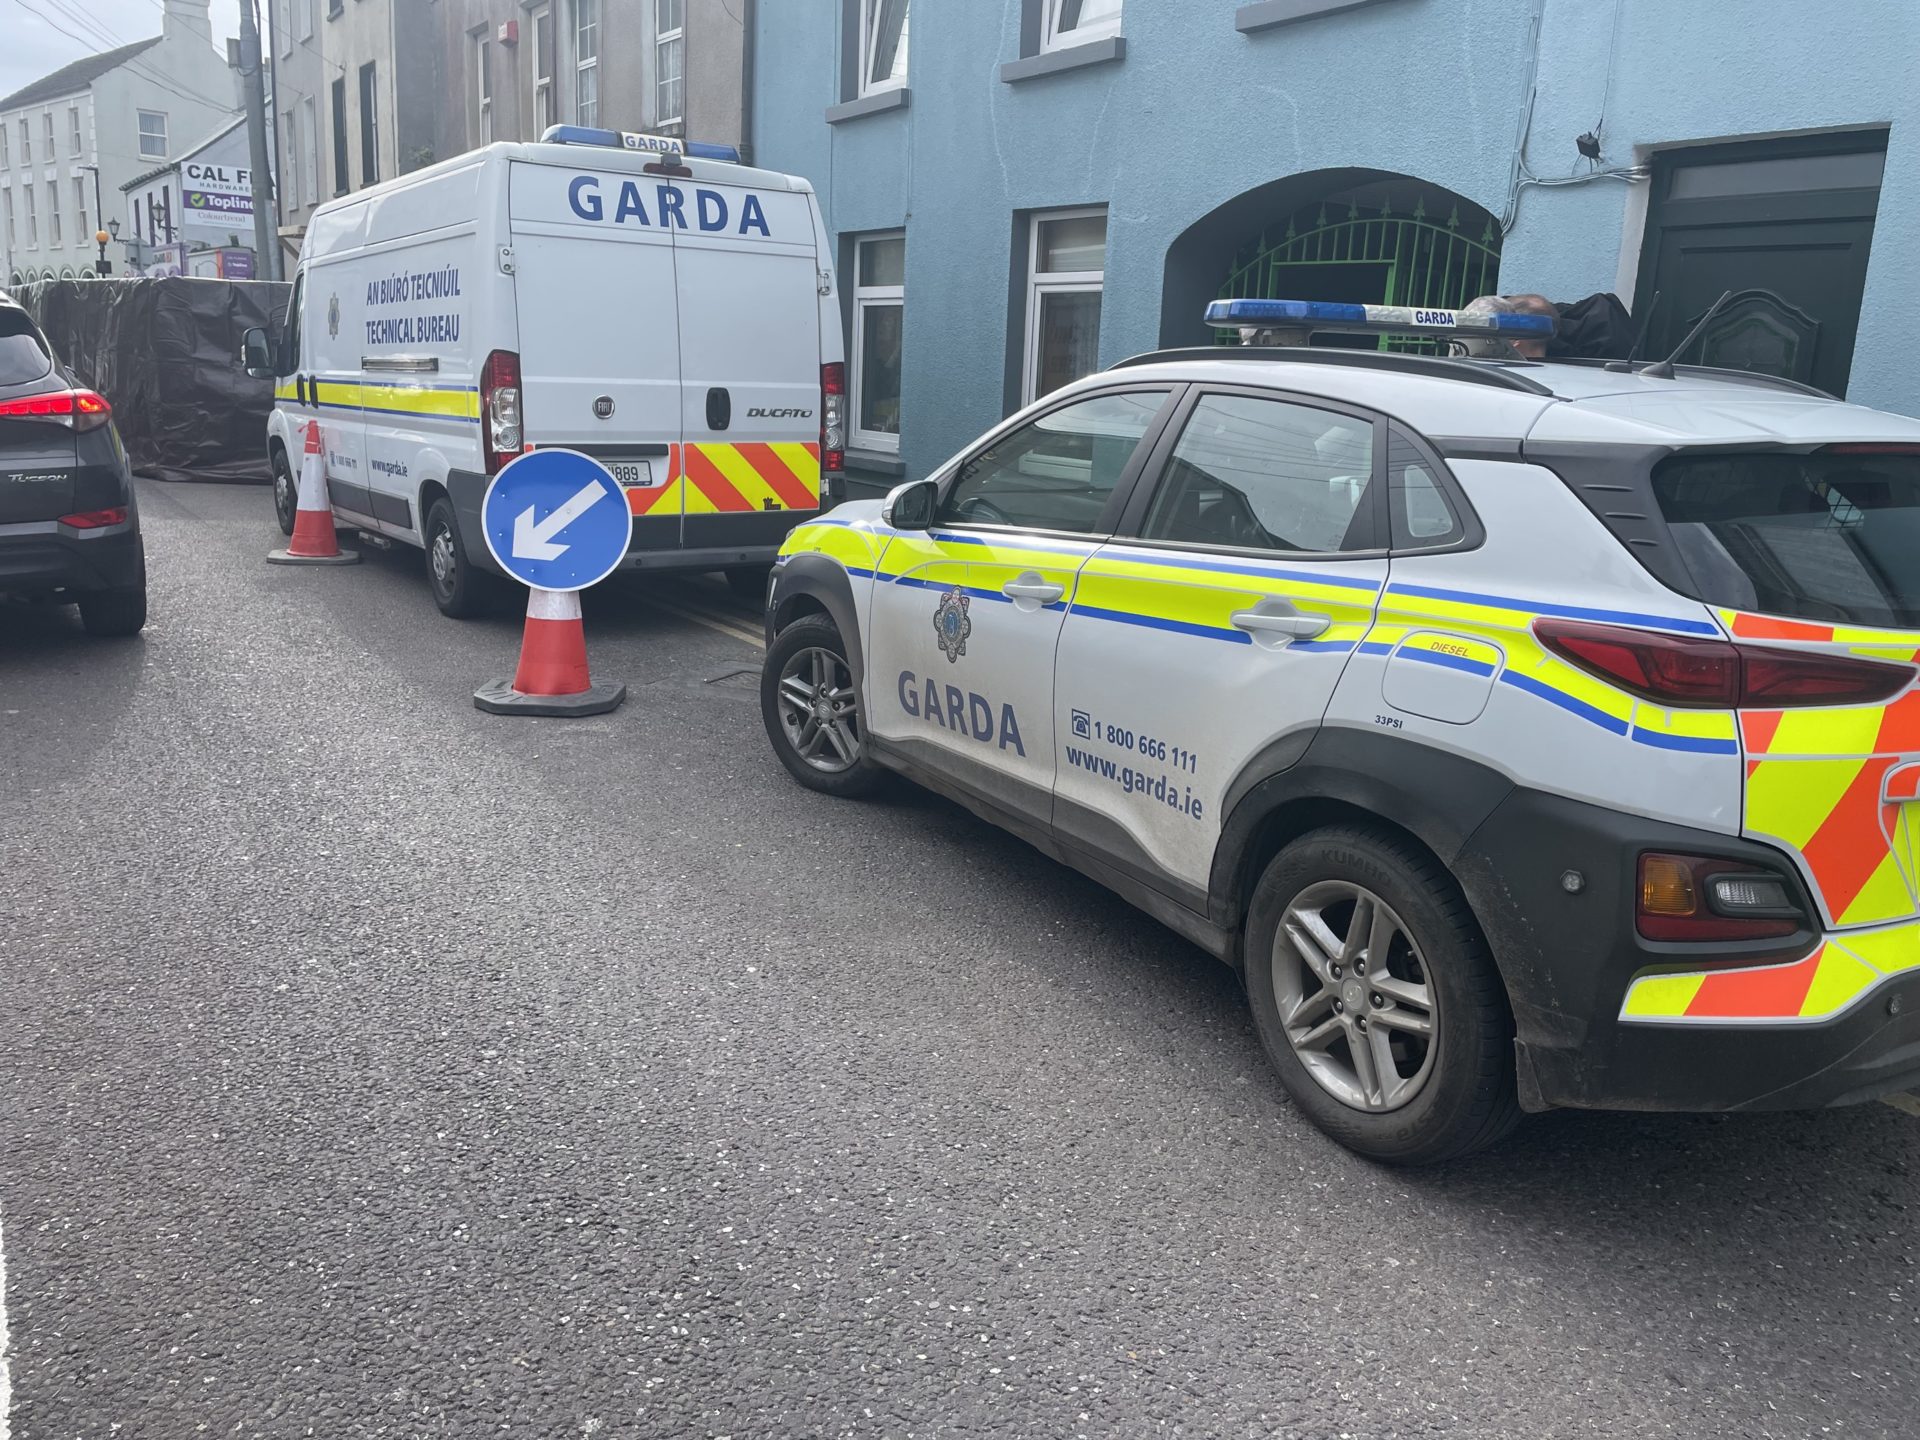 Gardaí outside the house where Tina Satchwell lived in Youghal, County Cork. Image: Jamie O’Hara/Newstalk